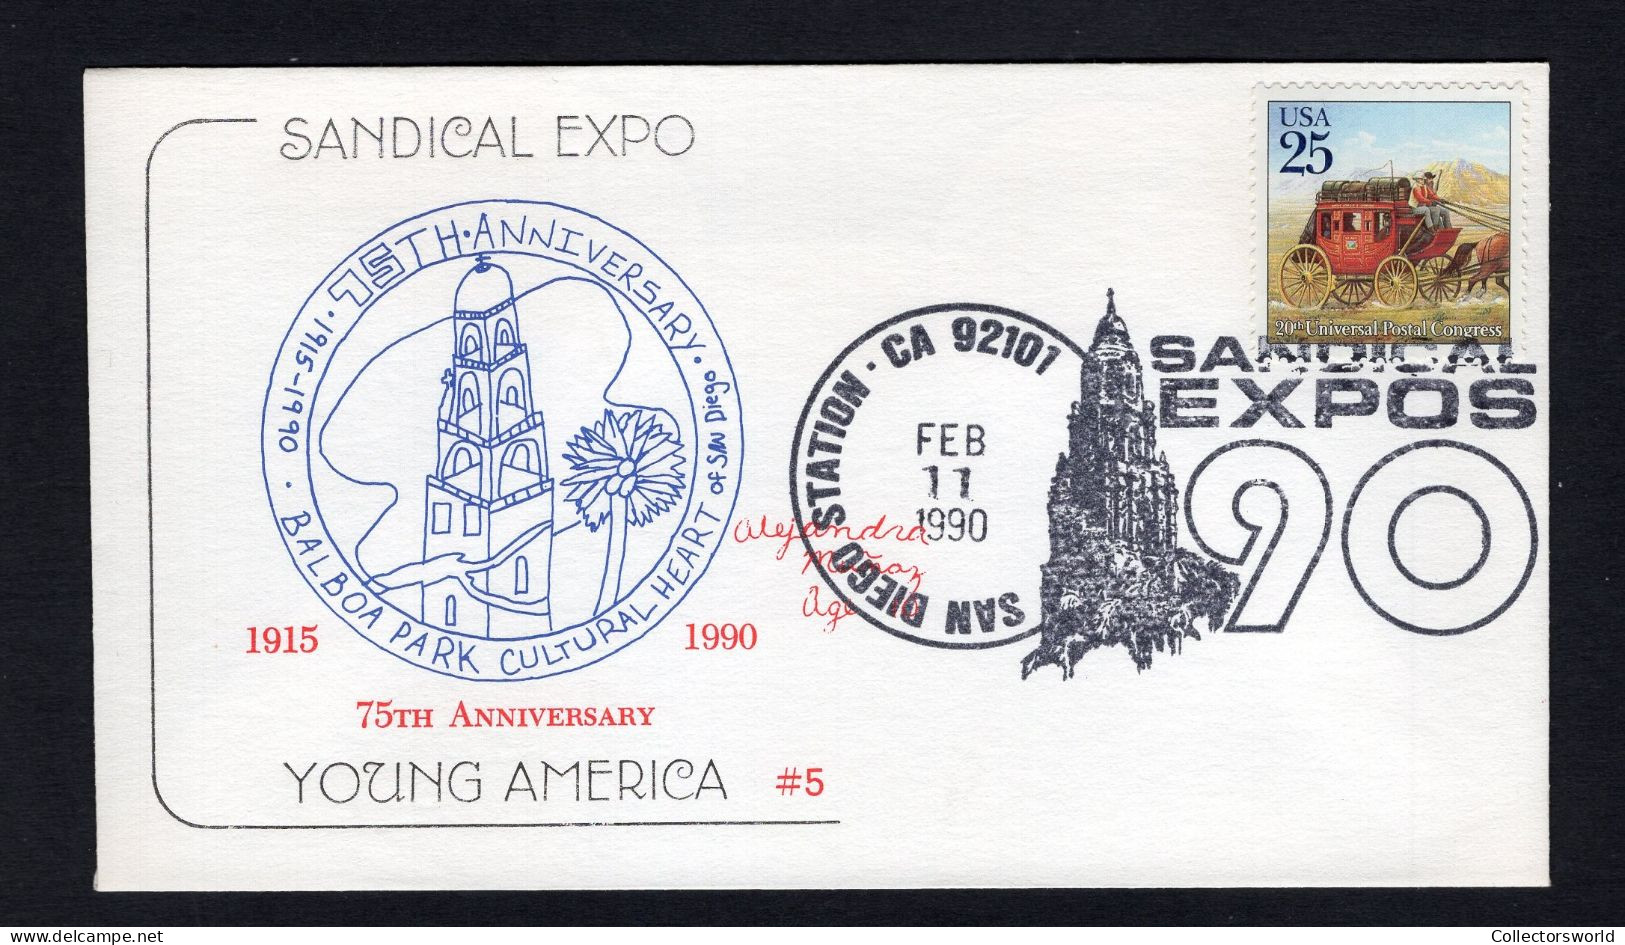 USA 1990 FDC Sandical Expo - Balboa Park Cultural Heart - Event Covers